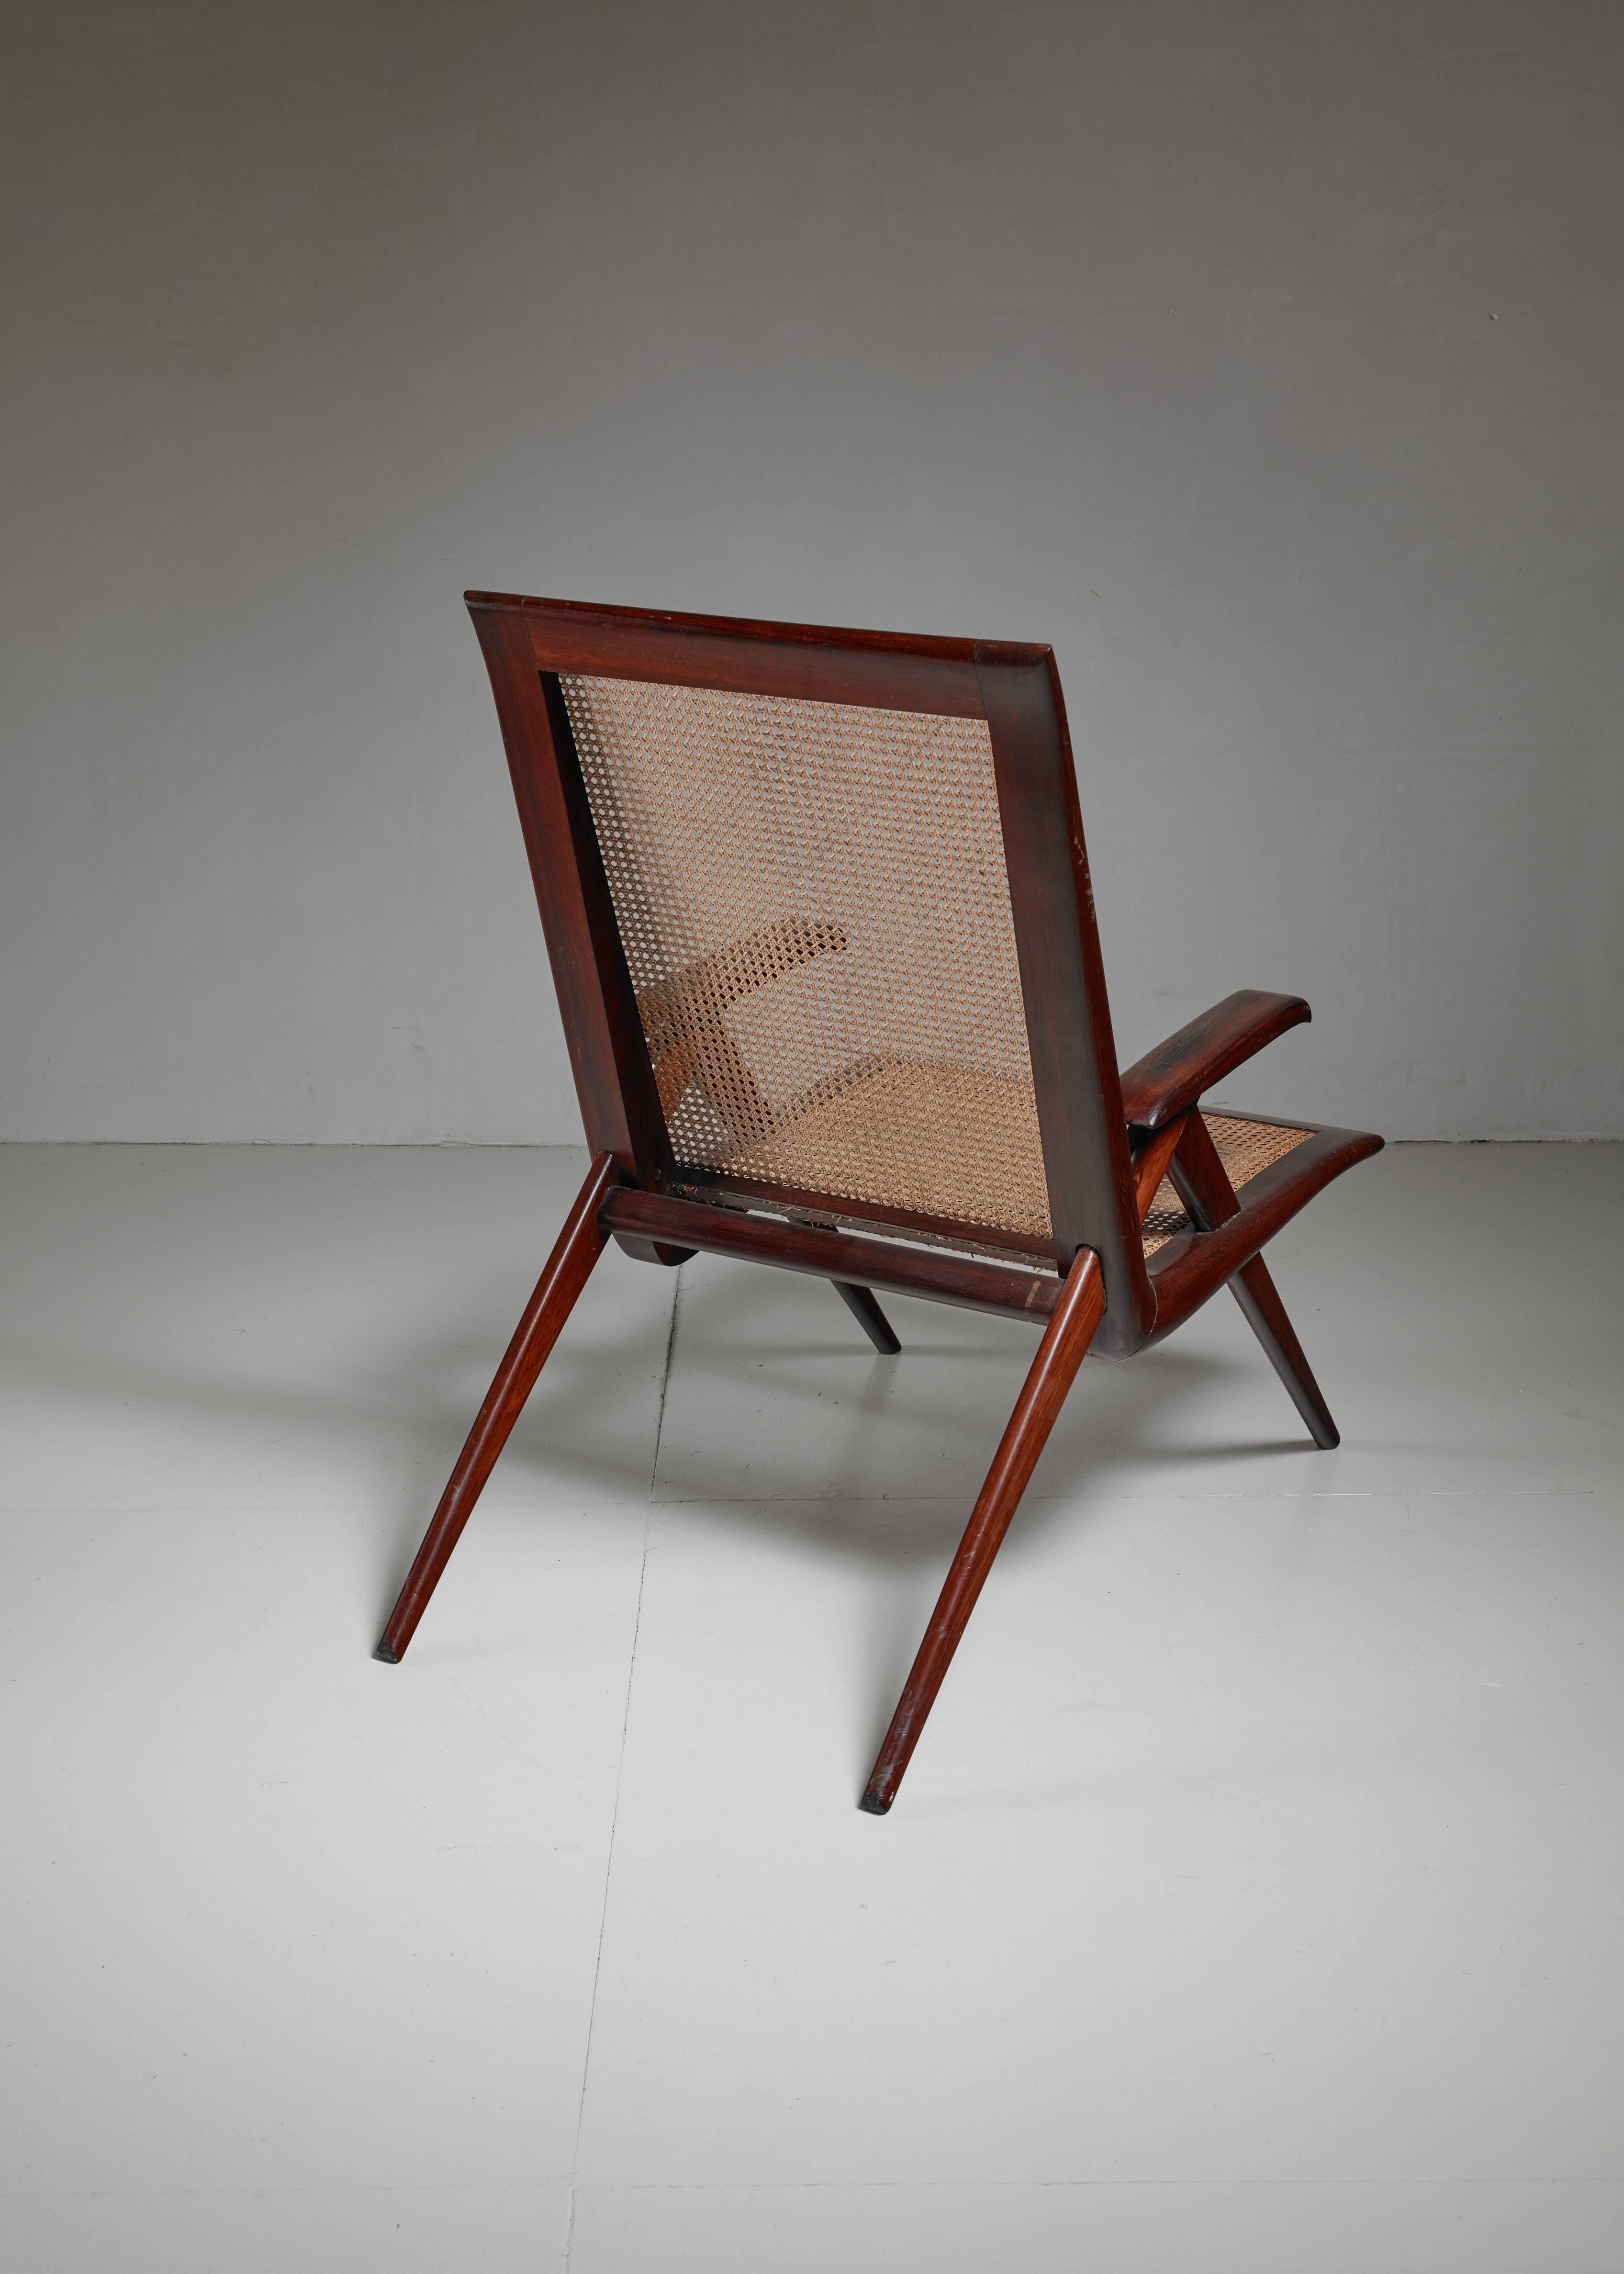 Brazilian Wooden Armchair with Woven Cane Seating, 1950s For Sale 1